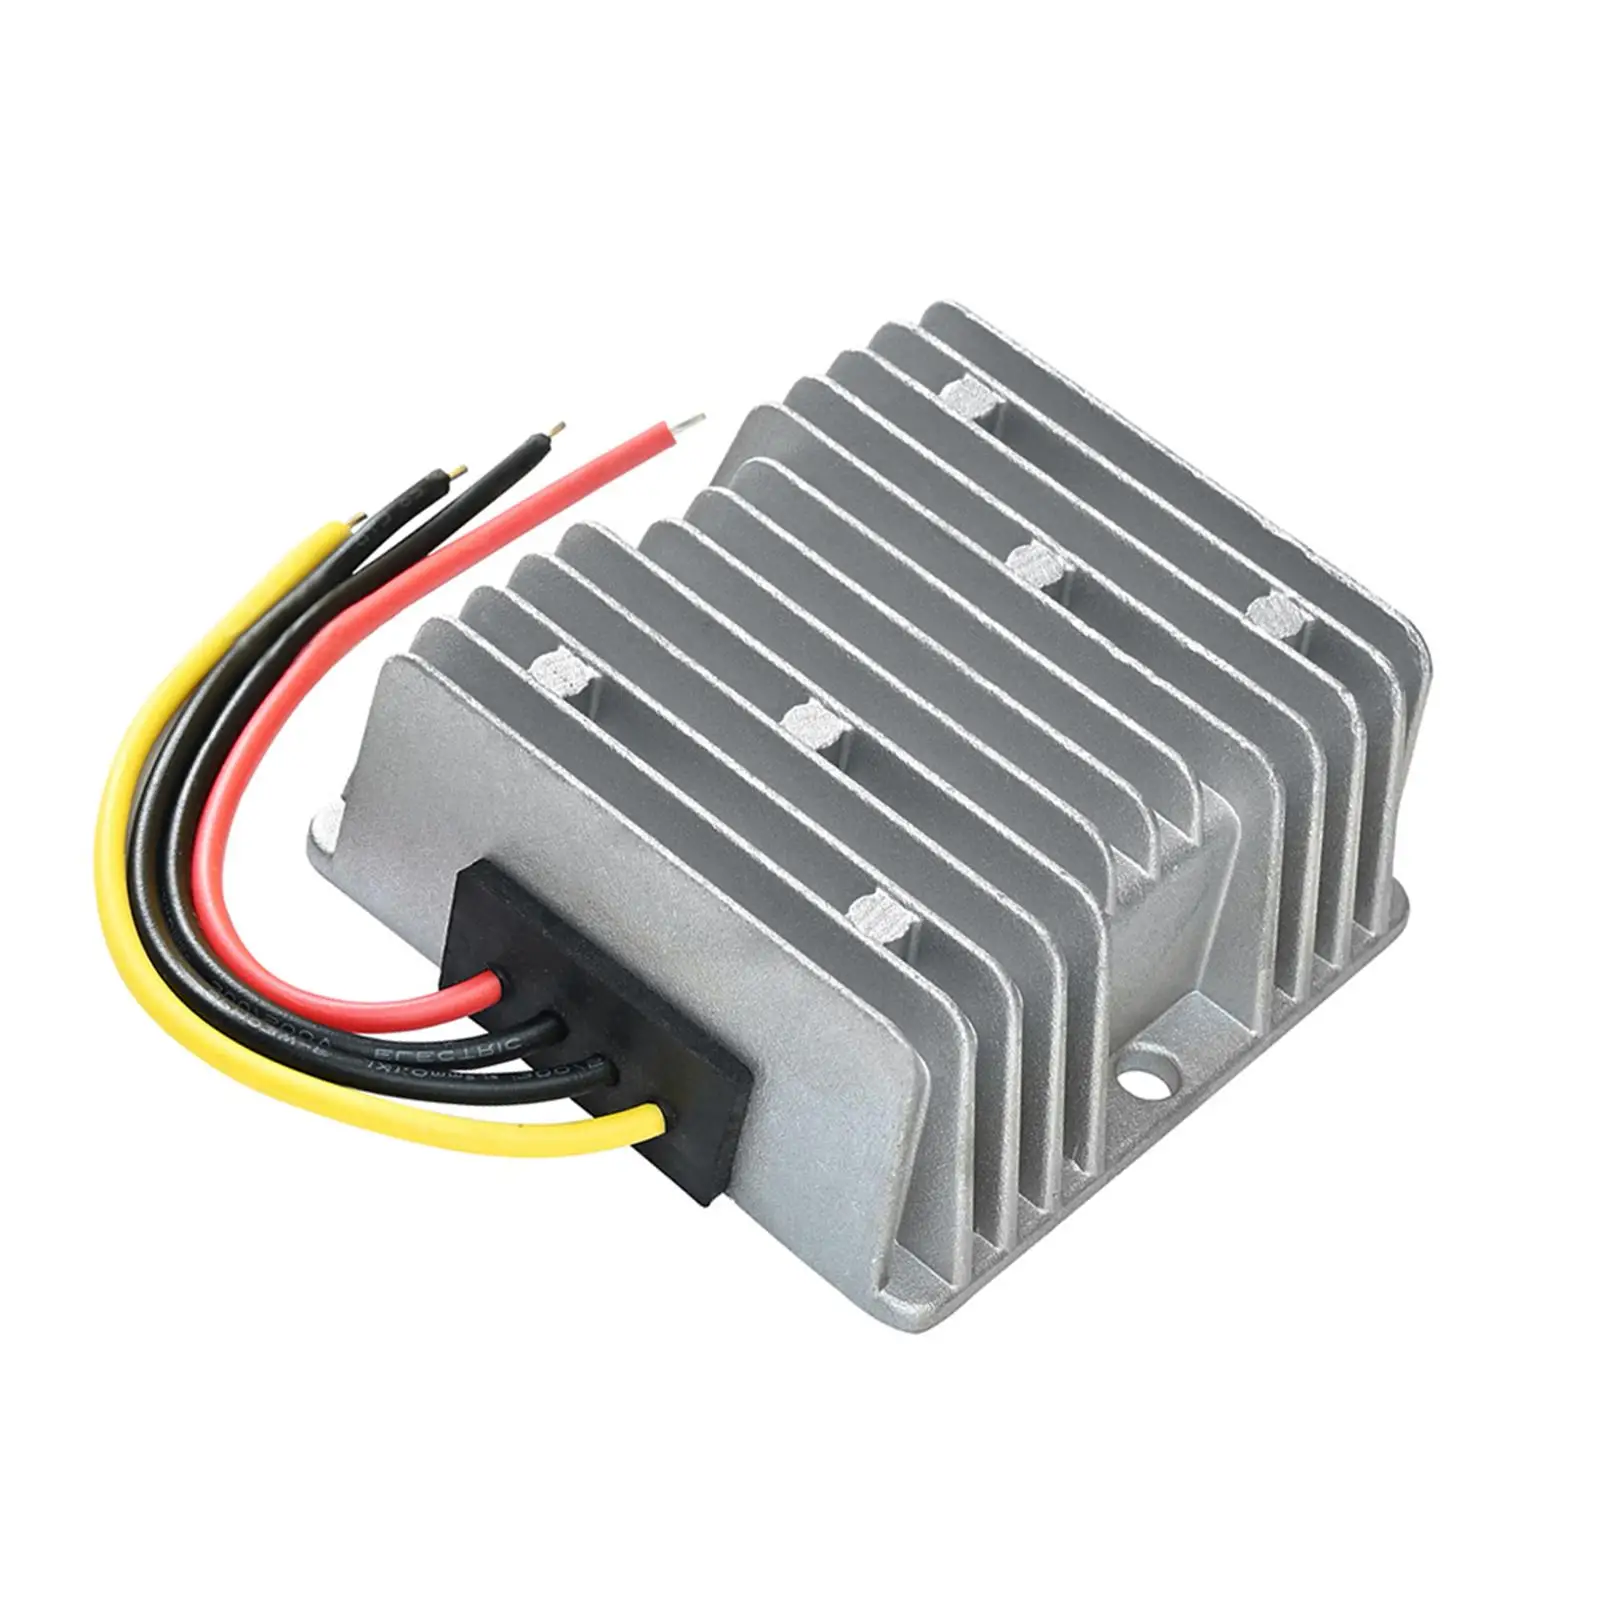 Converter Heat Dissipation Replacements Module Over Current Protection Over Temperature Protection Convenient for Audio Car